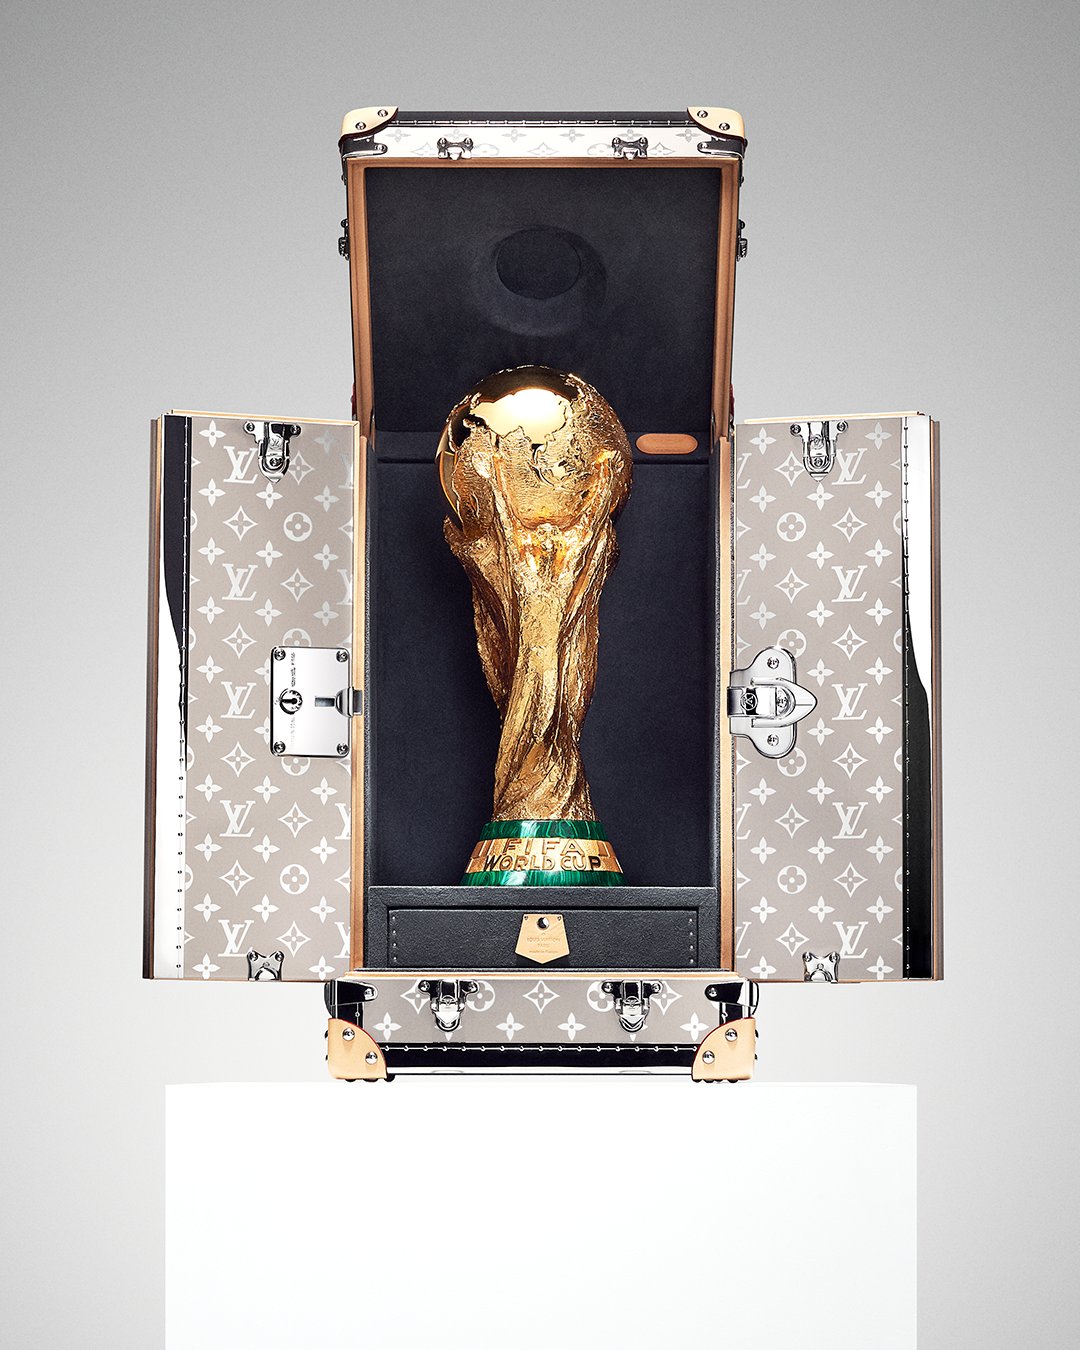 Louis Vuitton sur Twitter : One step closer to the trophy